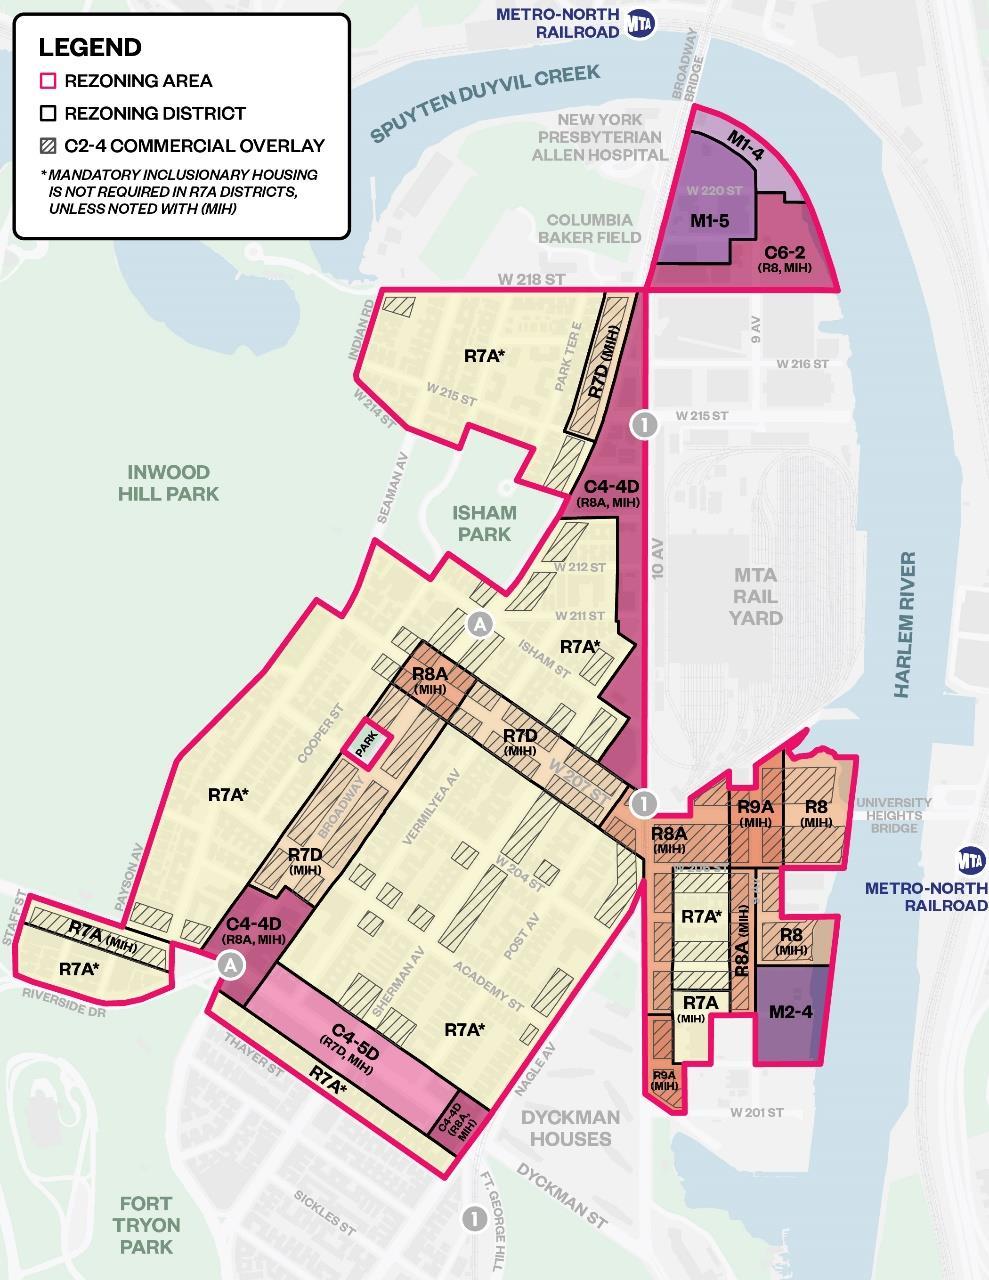 PROPOSED ACTIONS ACCIONES PROPUESTAS Zoning map amendment to: Rezone portions of existing manufacturing, commercial and residential districts Rezone portions of existing commercial overlays and